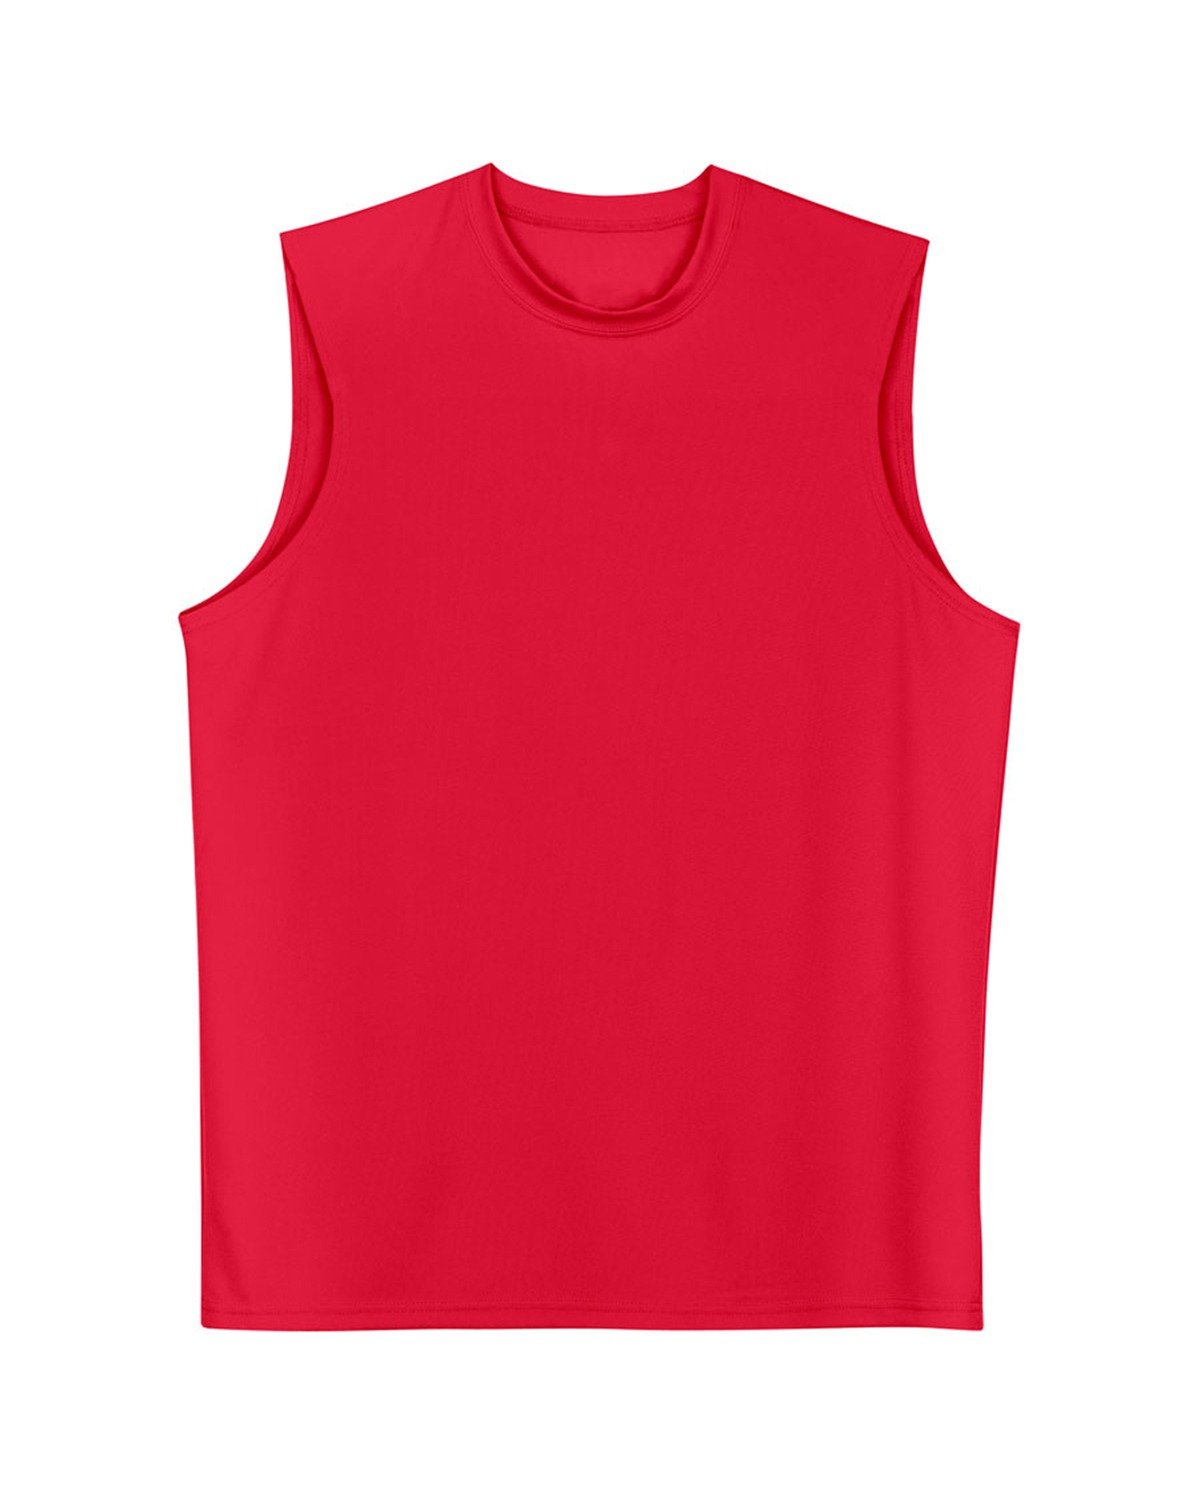 Red muscle tee  Front view.